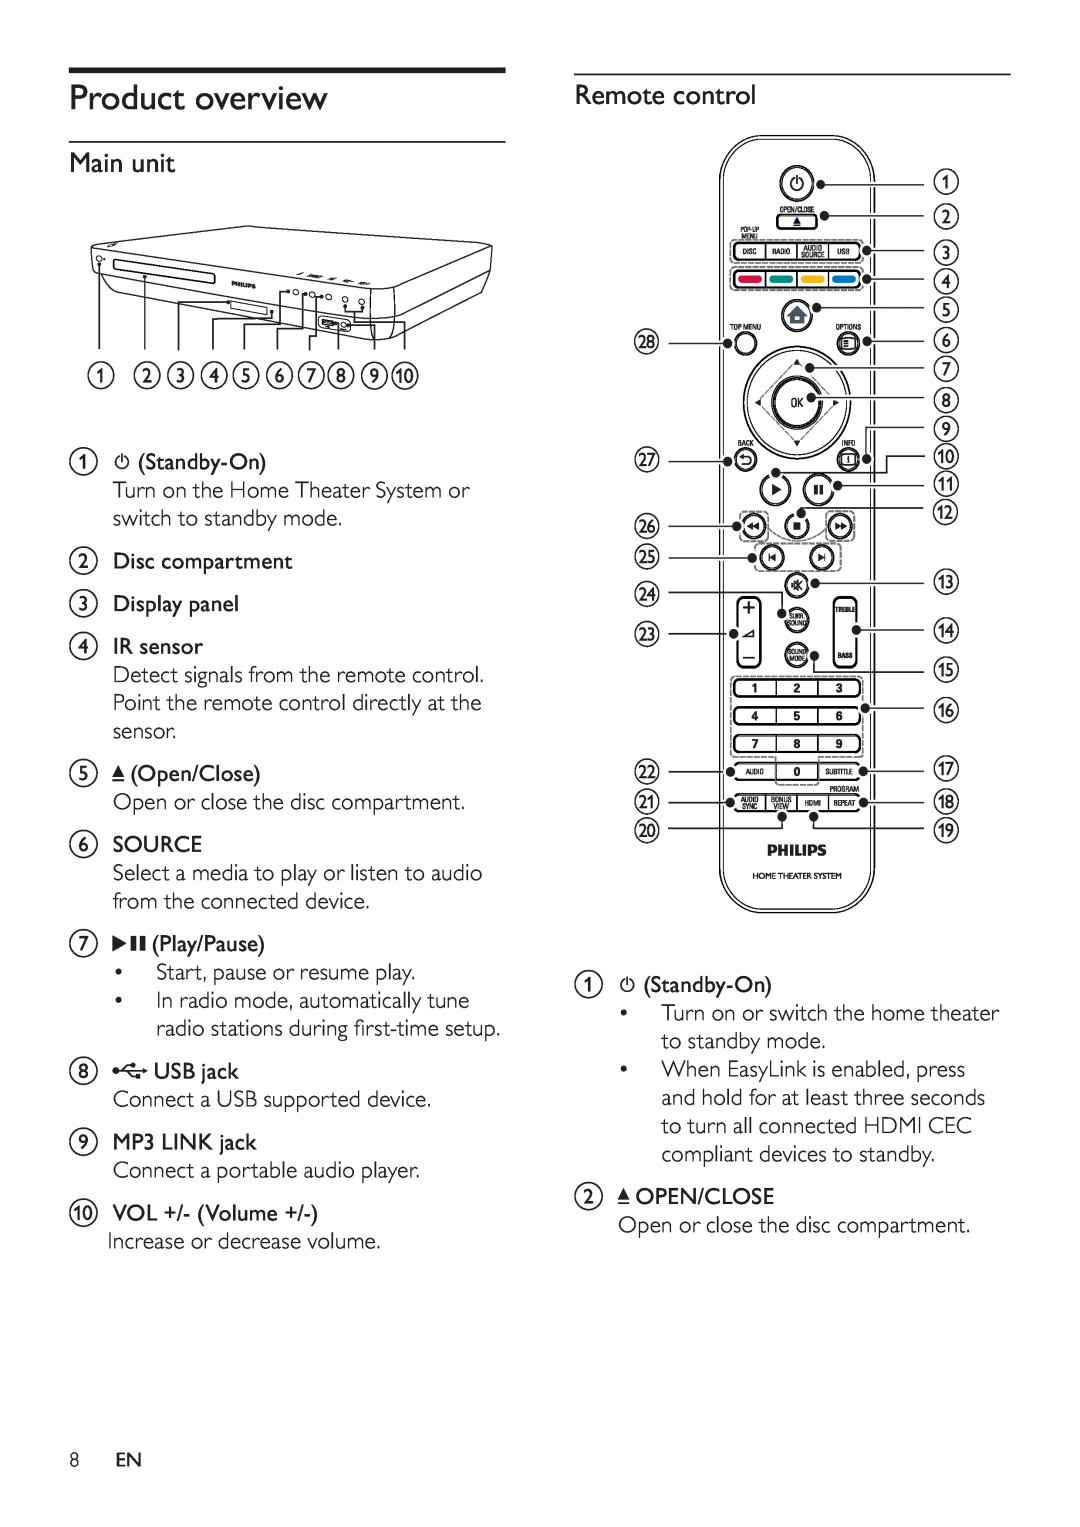 Philips HTS7500, HTS7520 user manual Product overview, Main unit, Remote control 